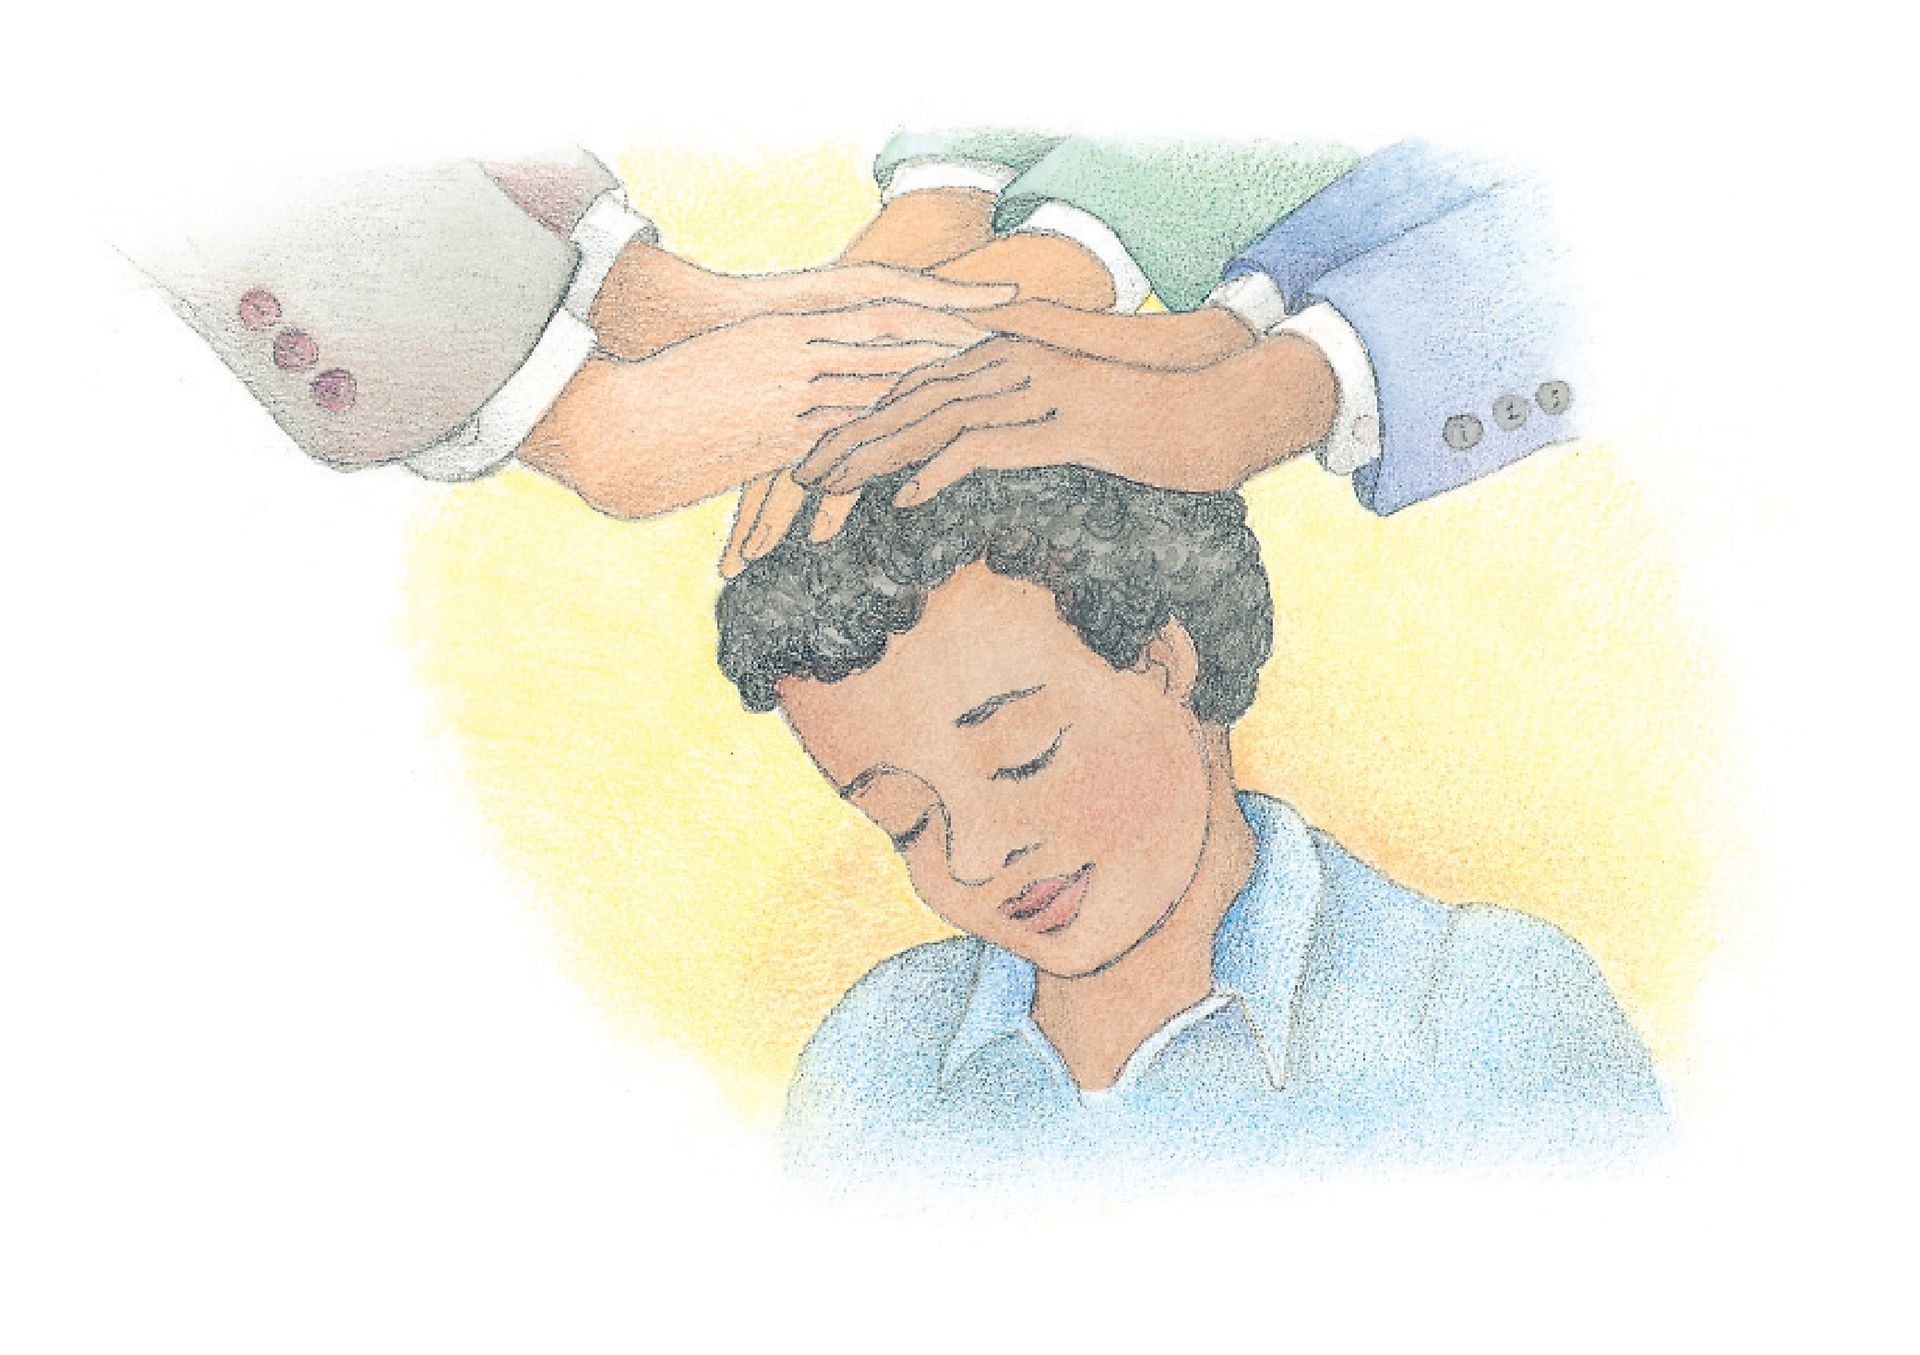 A young boy being confirmed a member of the Church. From the Children’s Songbook, page 105, “The Holy Ghost”; watercolor illustration by Phyllis Luch.